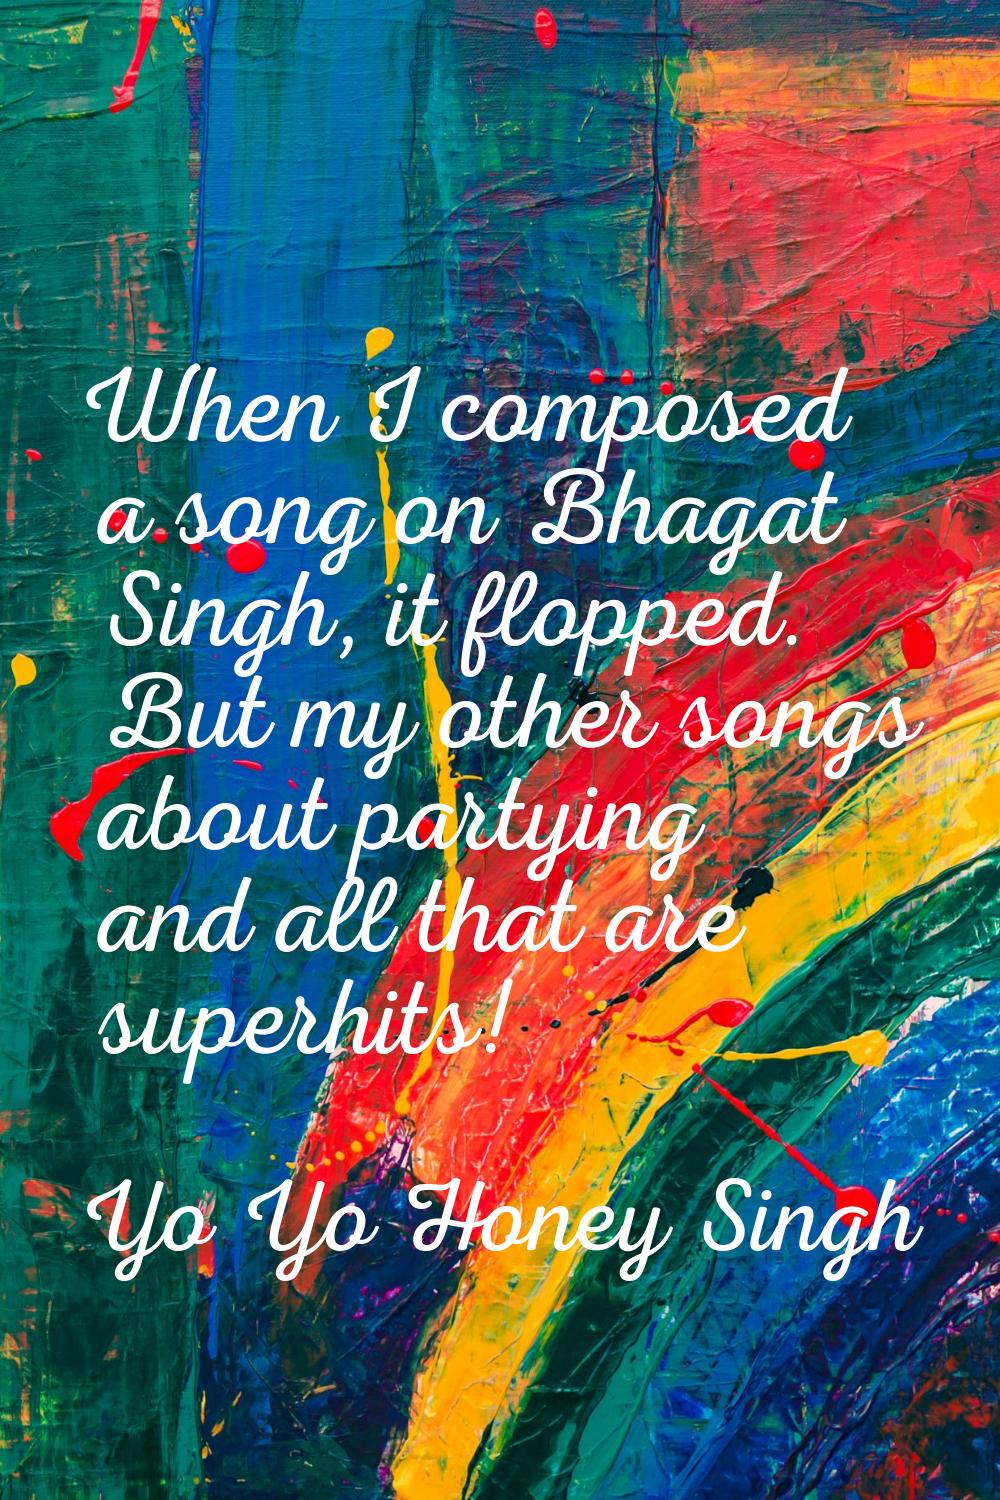 When I composed a song on Bhagat Singh, it flopped. But my other songs about partying and all that 